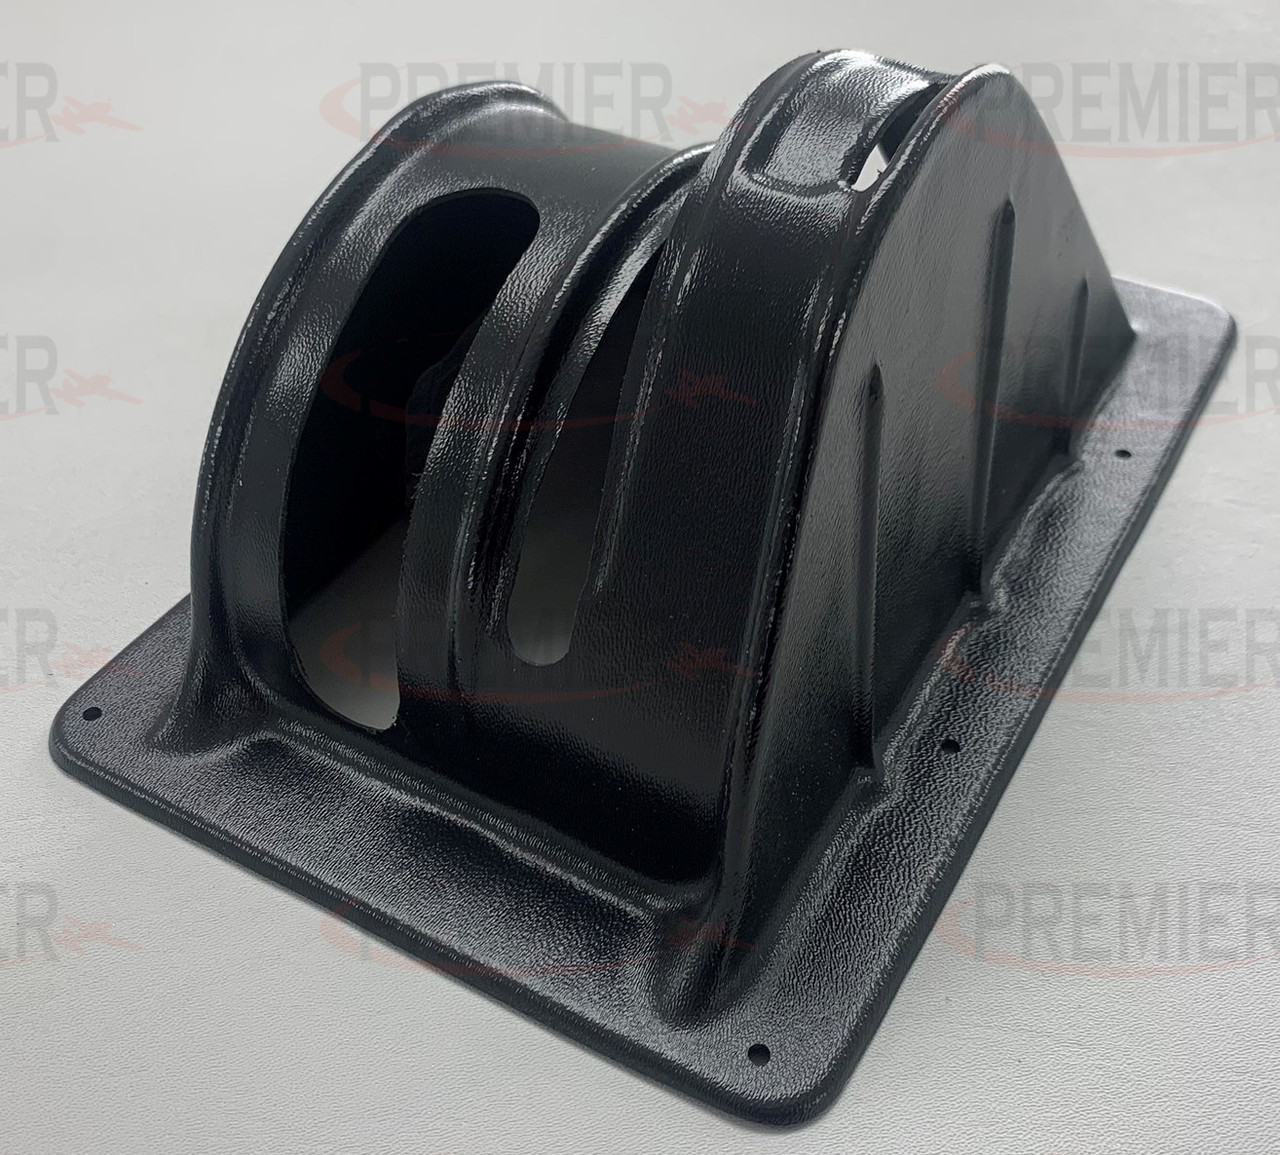 H69596-14, Piper PA-32, Flap Handle Cover, 69596-02, 69596-03, 69596-05, 69596-06, 69596-12, 69596-14, 69596-15